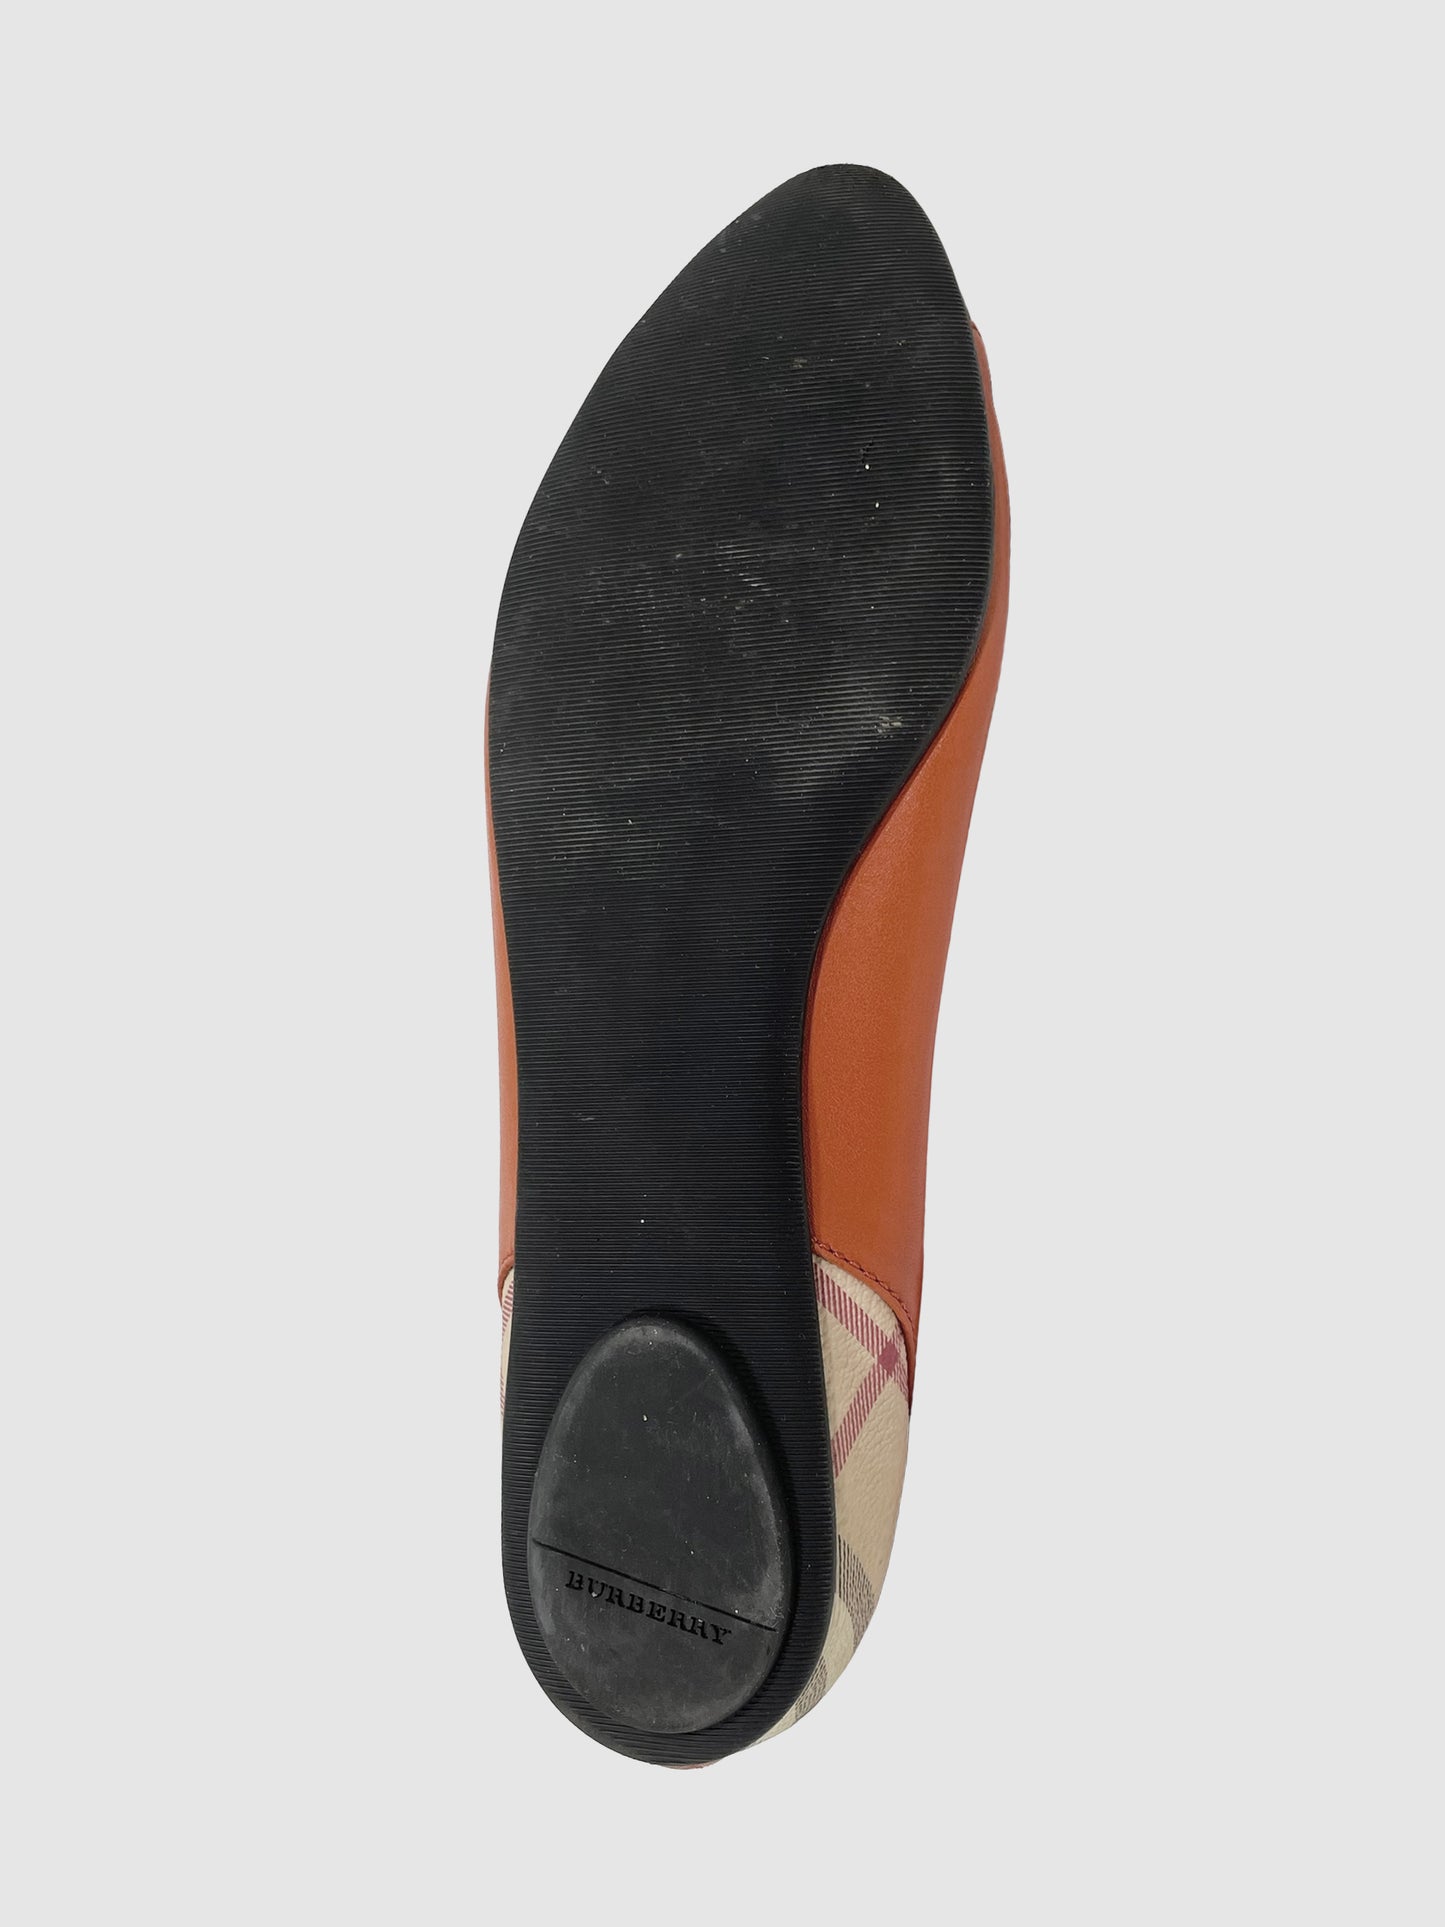 Burberry Leather Flats - Size 39